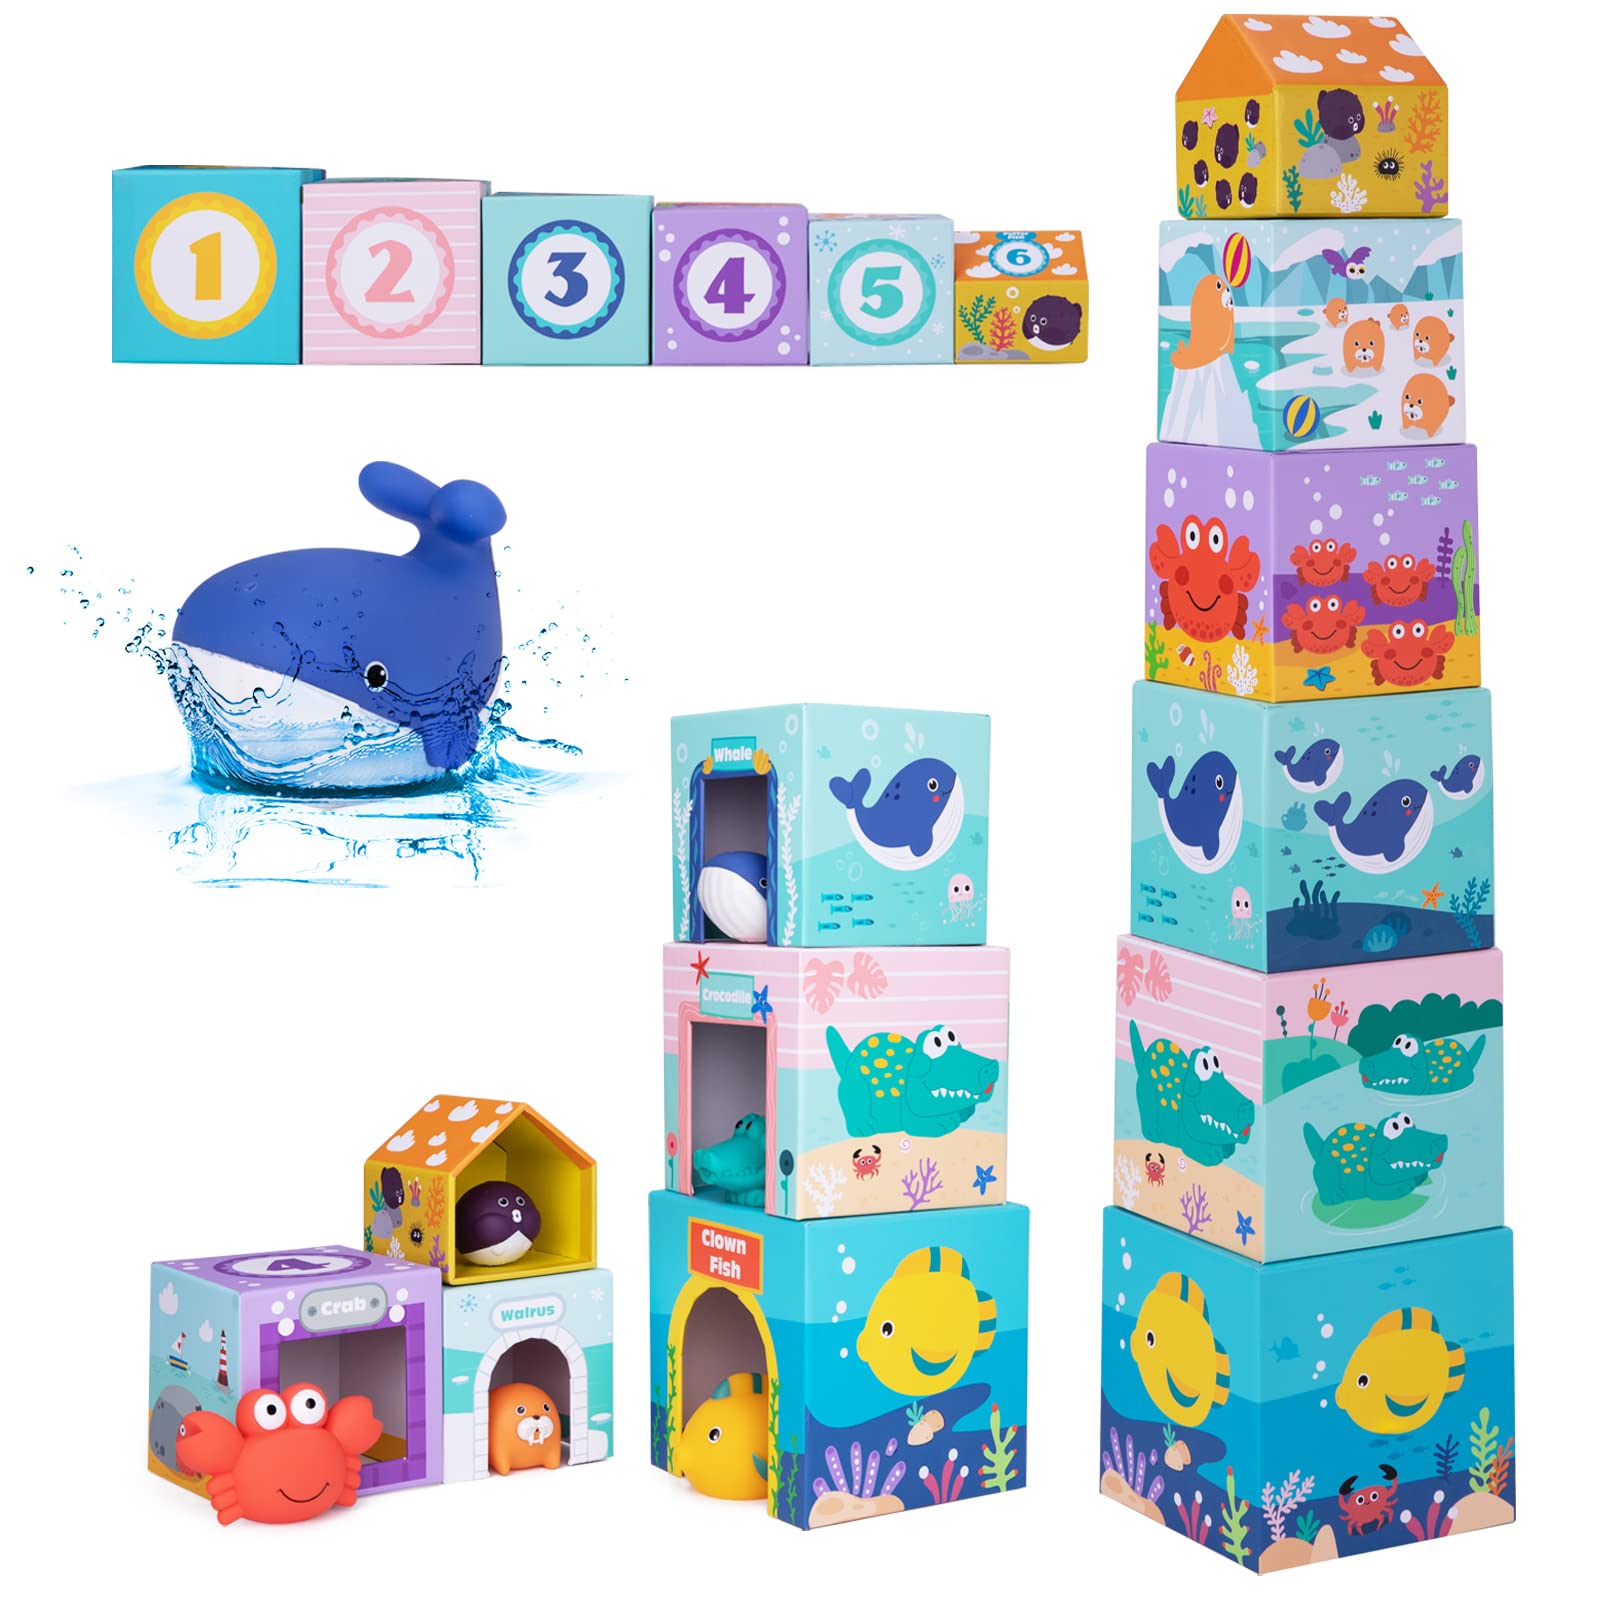 Ocean Sorting & Stacking Toys for Toddlers 1-3 – Educational Number Blocks Toys with Bathtub Toys for Boys & Girls – Our Montessori Toys for Toddlers 1 Year Old to 3 Year Old Make a Great Gift